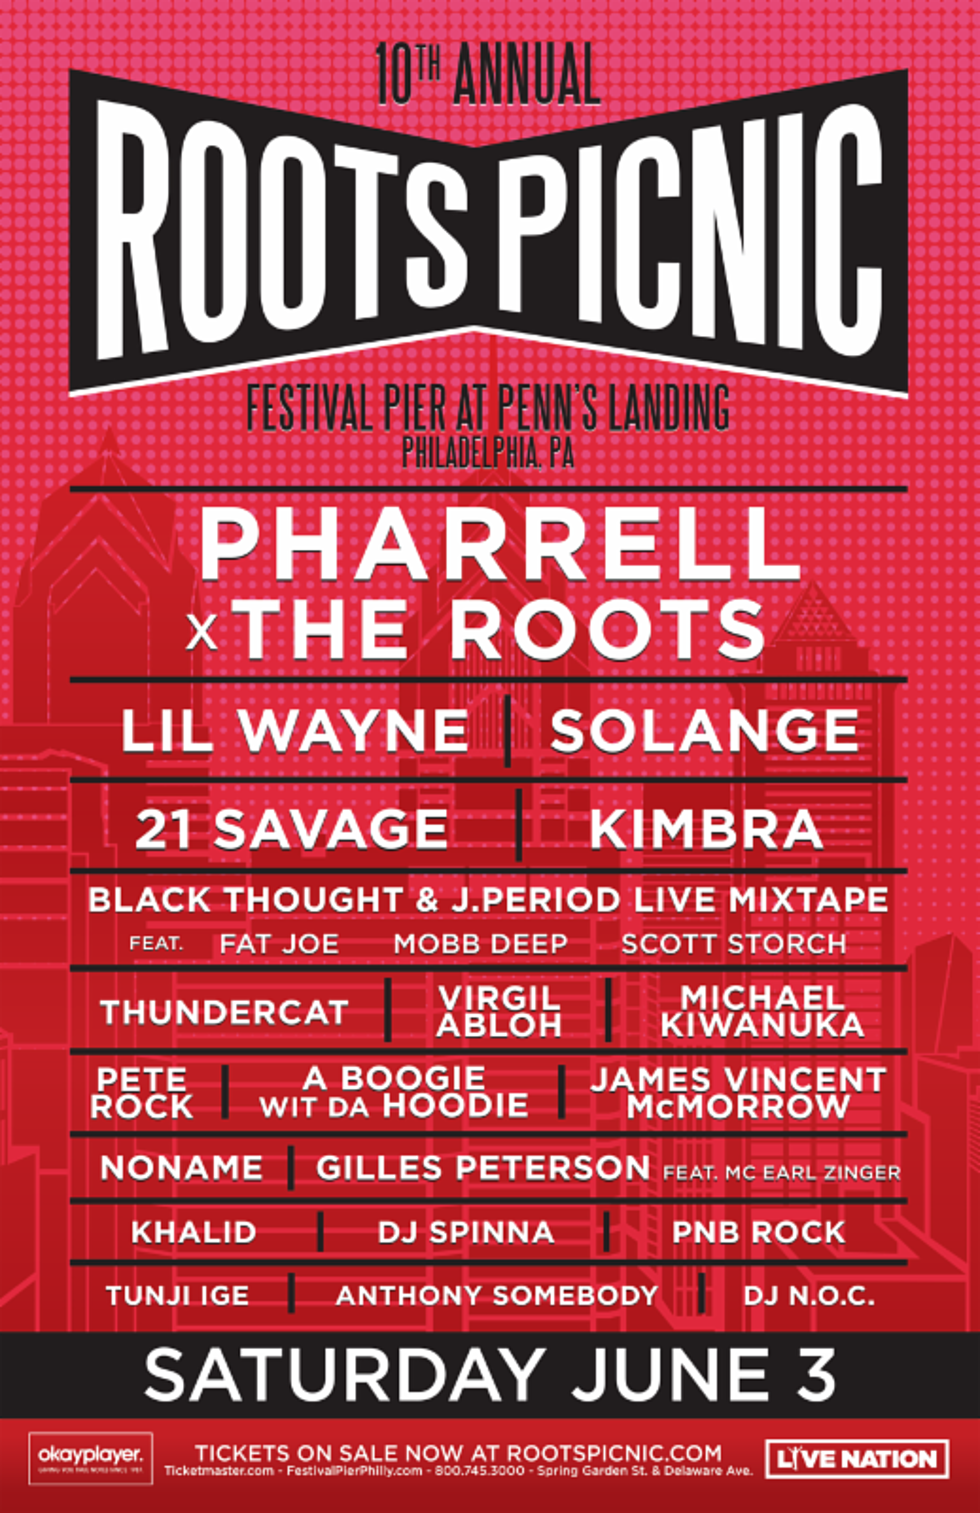 The Roots Picnic Philly: 2017 lineup and tickets